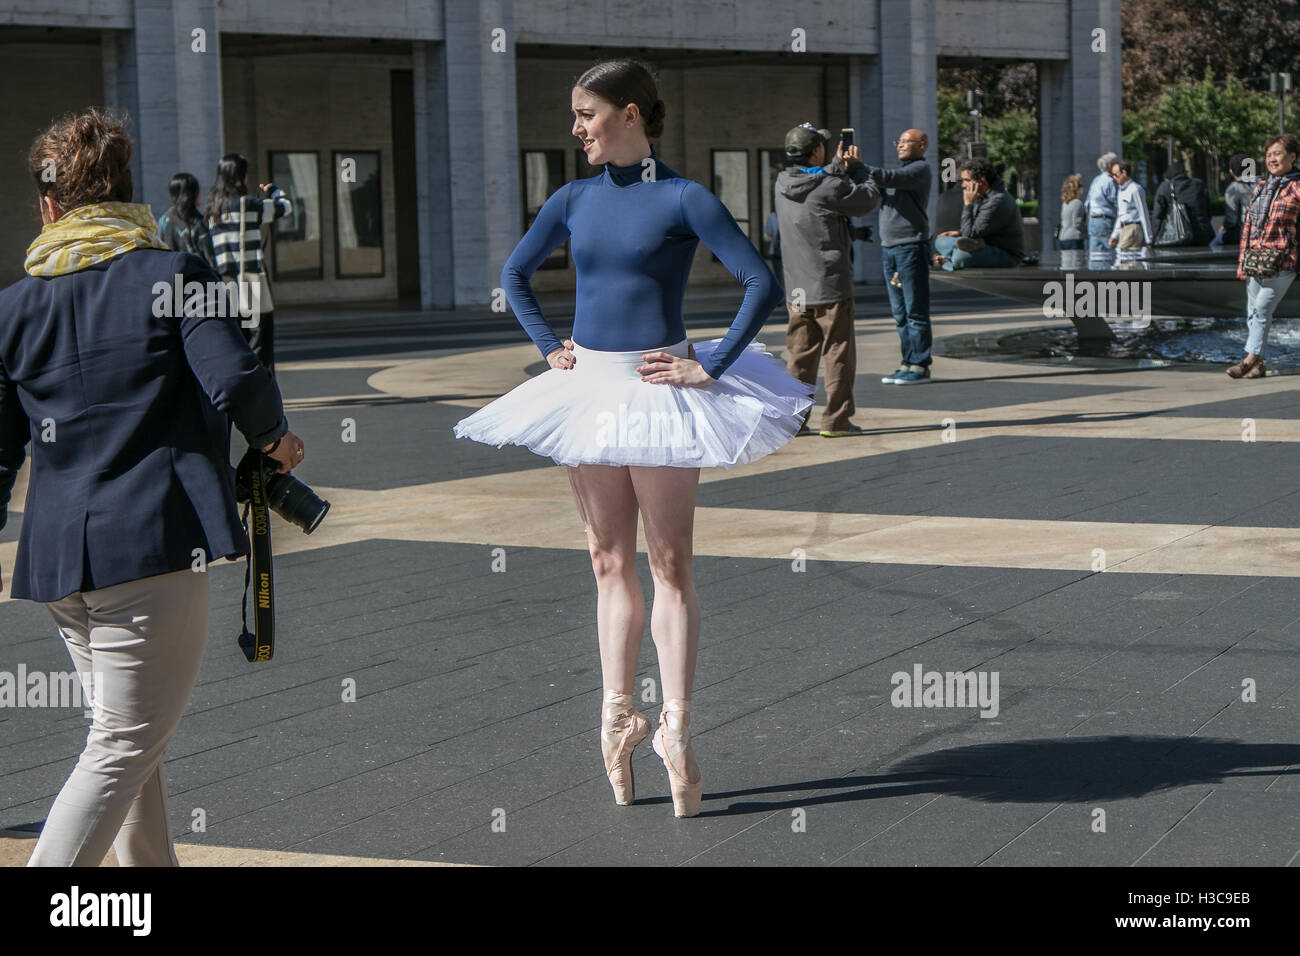 A young female ballet student is posing for photographs at the Lincoln Center. Stock Photo